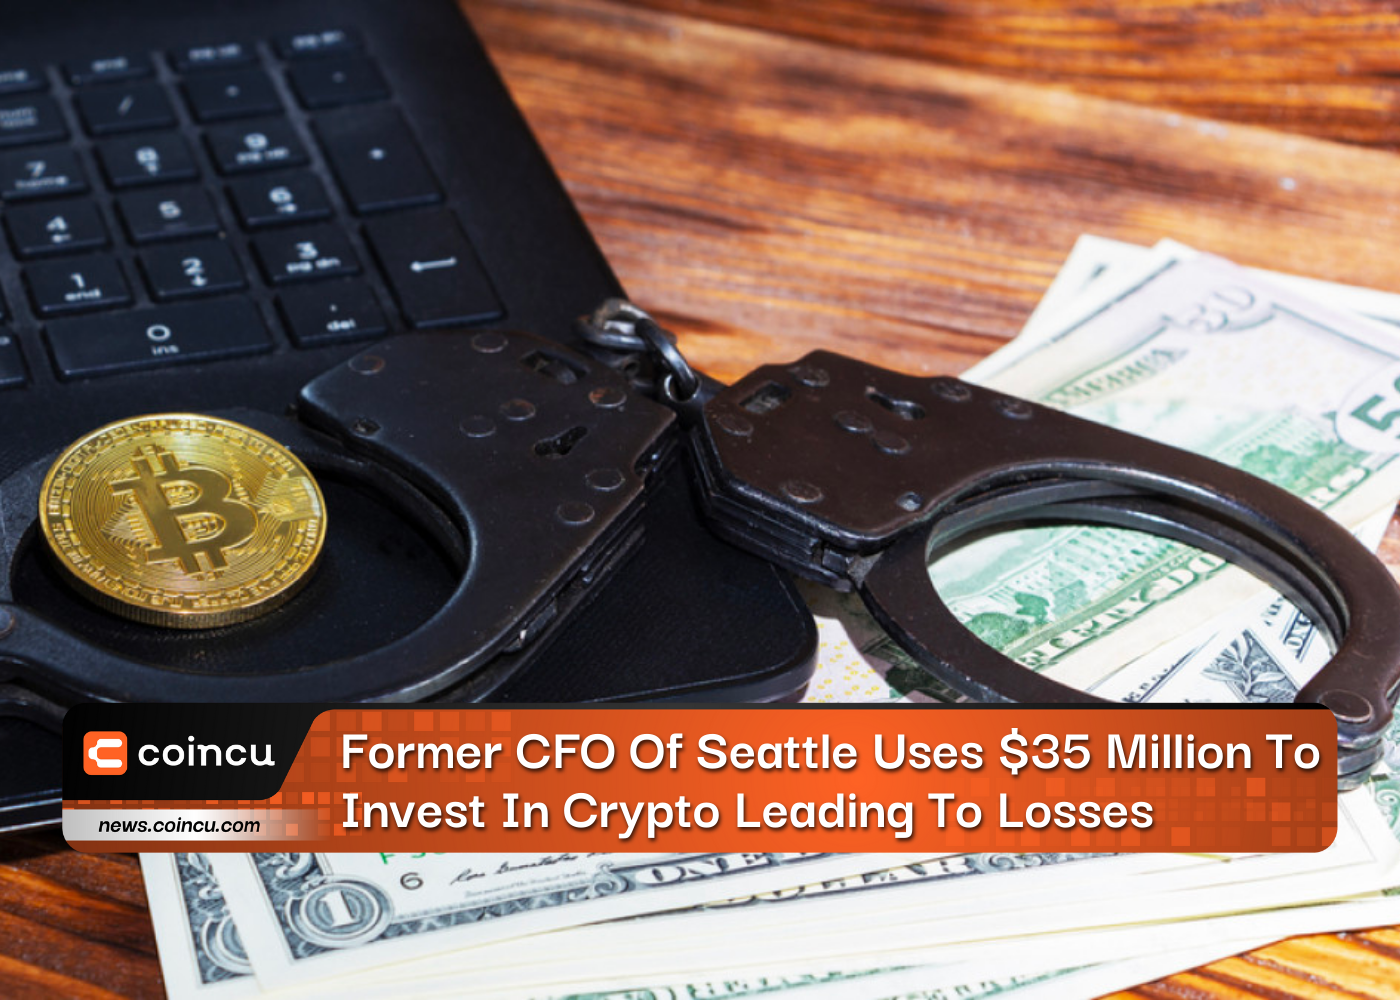 Former CFO Of Seattle Uses $35 Million To Invest In Crypto Leading To Losses